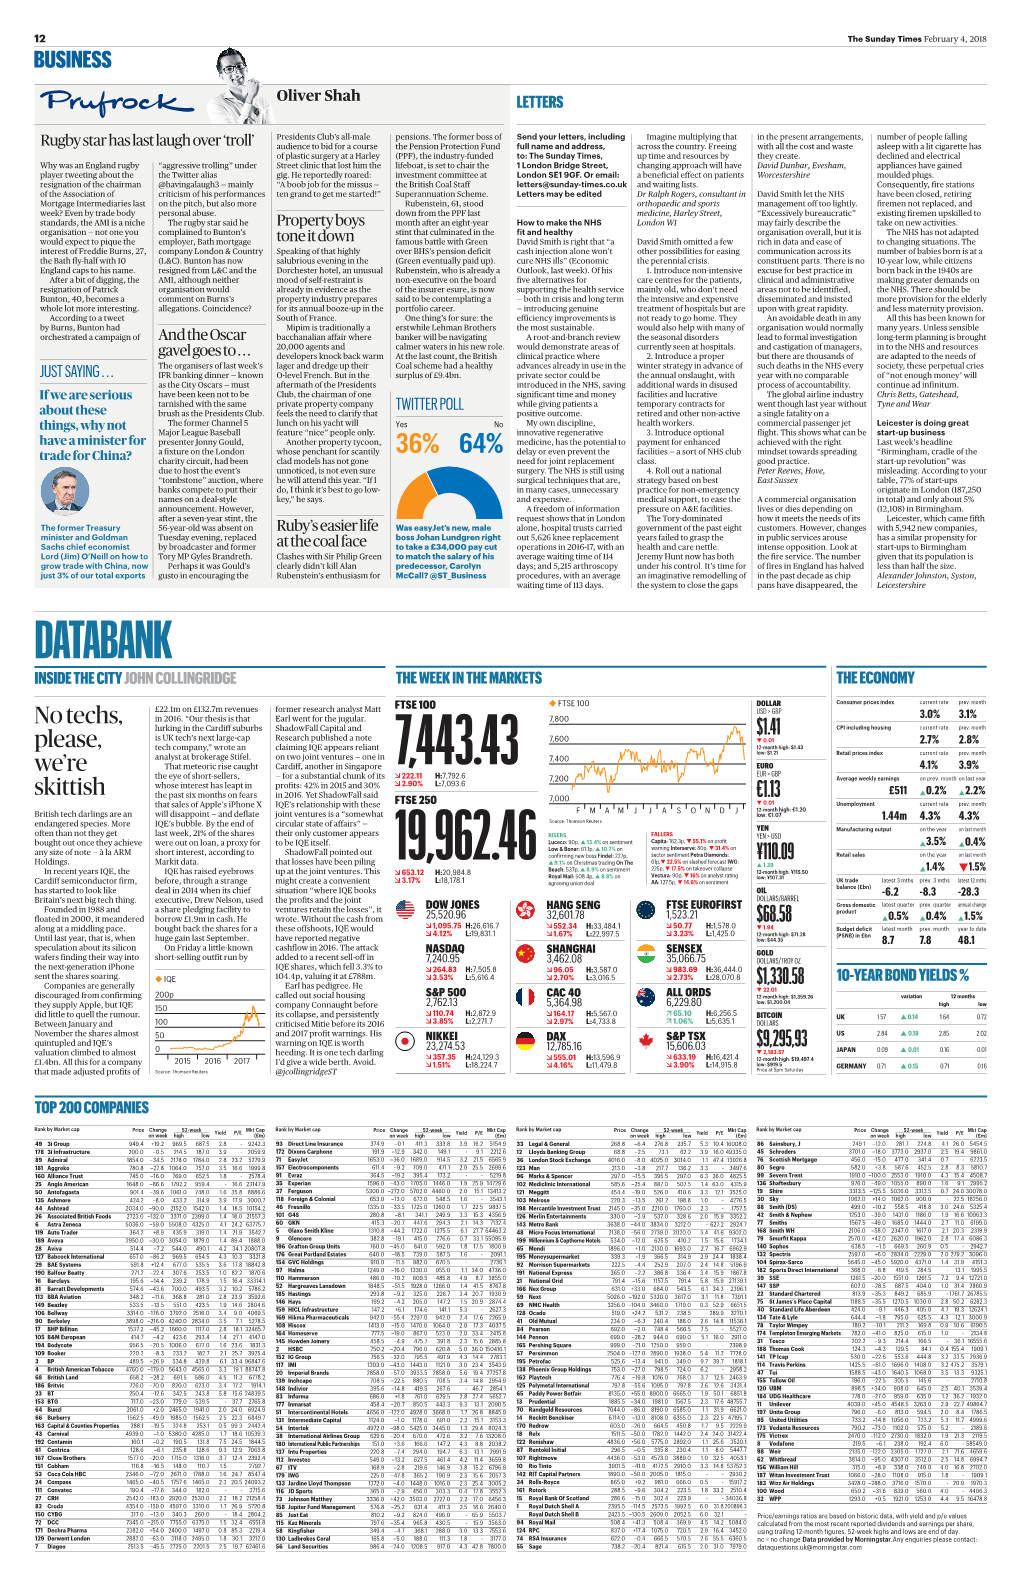 Databank Inside the City John Collingridge the Week in the Markets the Economy